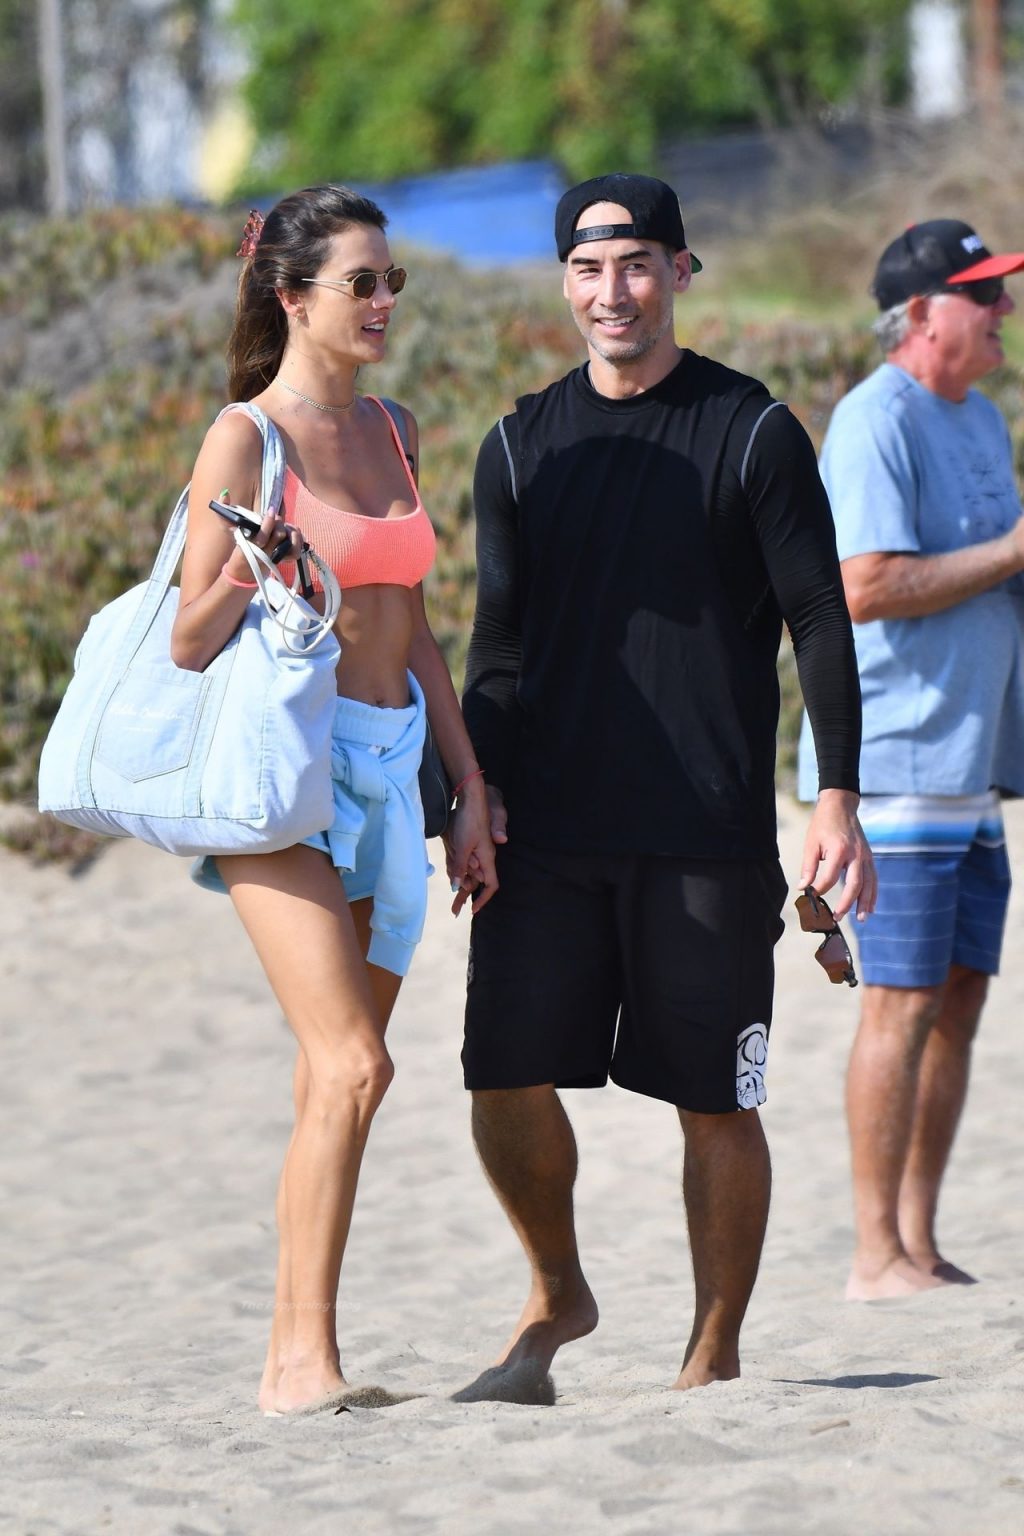 Alessandra Ambrosio Enjoys a Game with Friends on the Beach in Santa Monica (69 Photos)